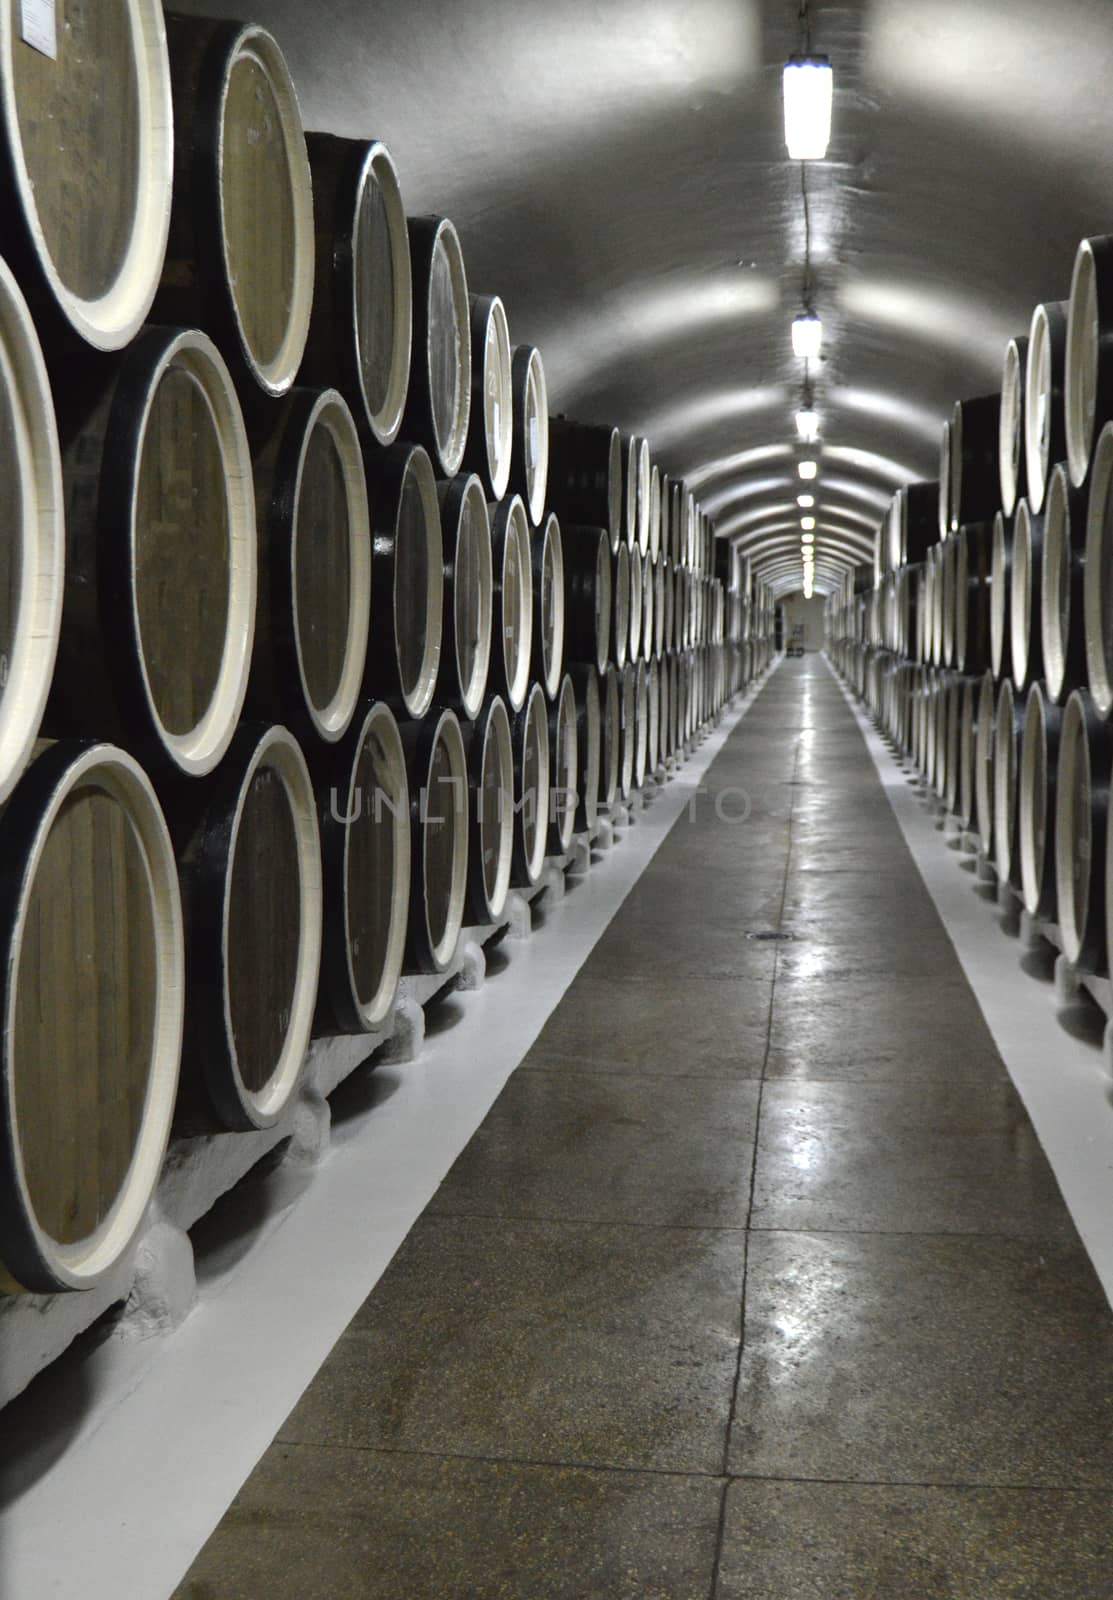 Oak barrels lie in rows in the wine cellar, storage and aging of wine.